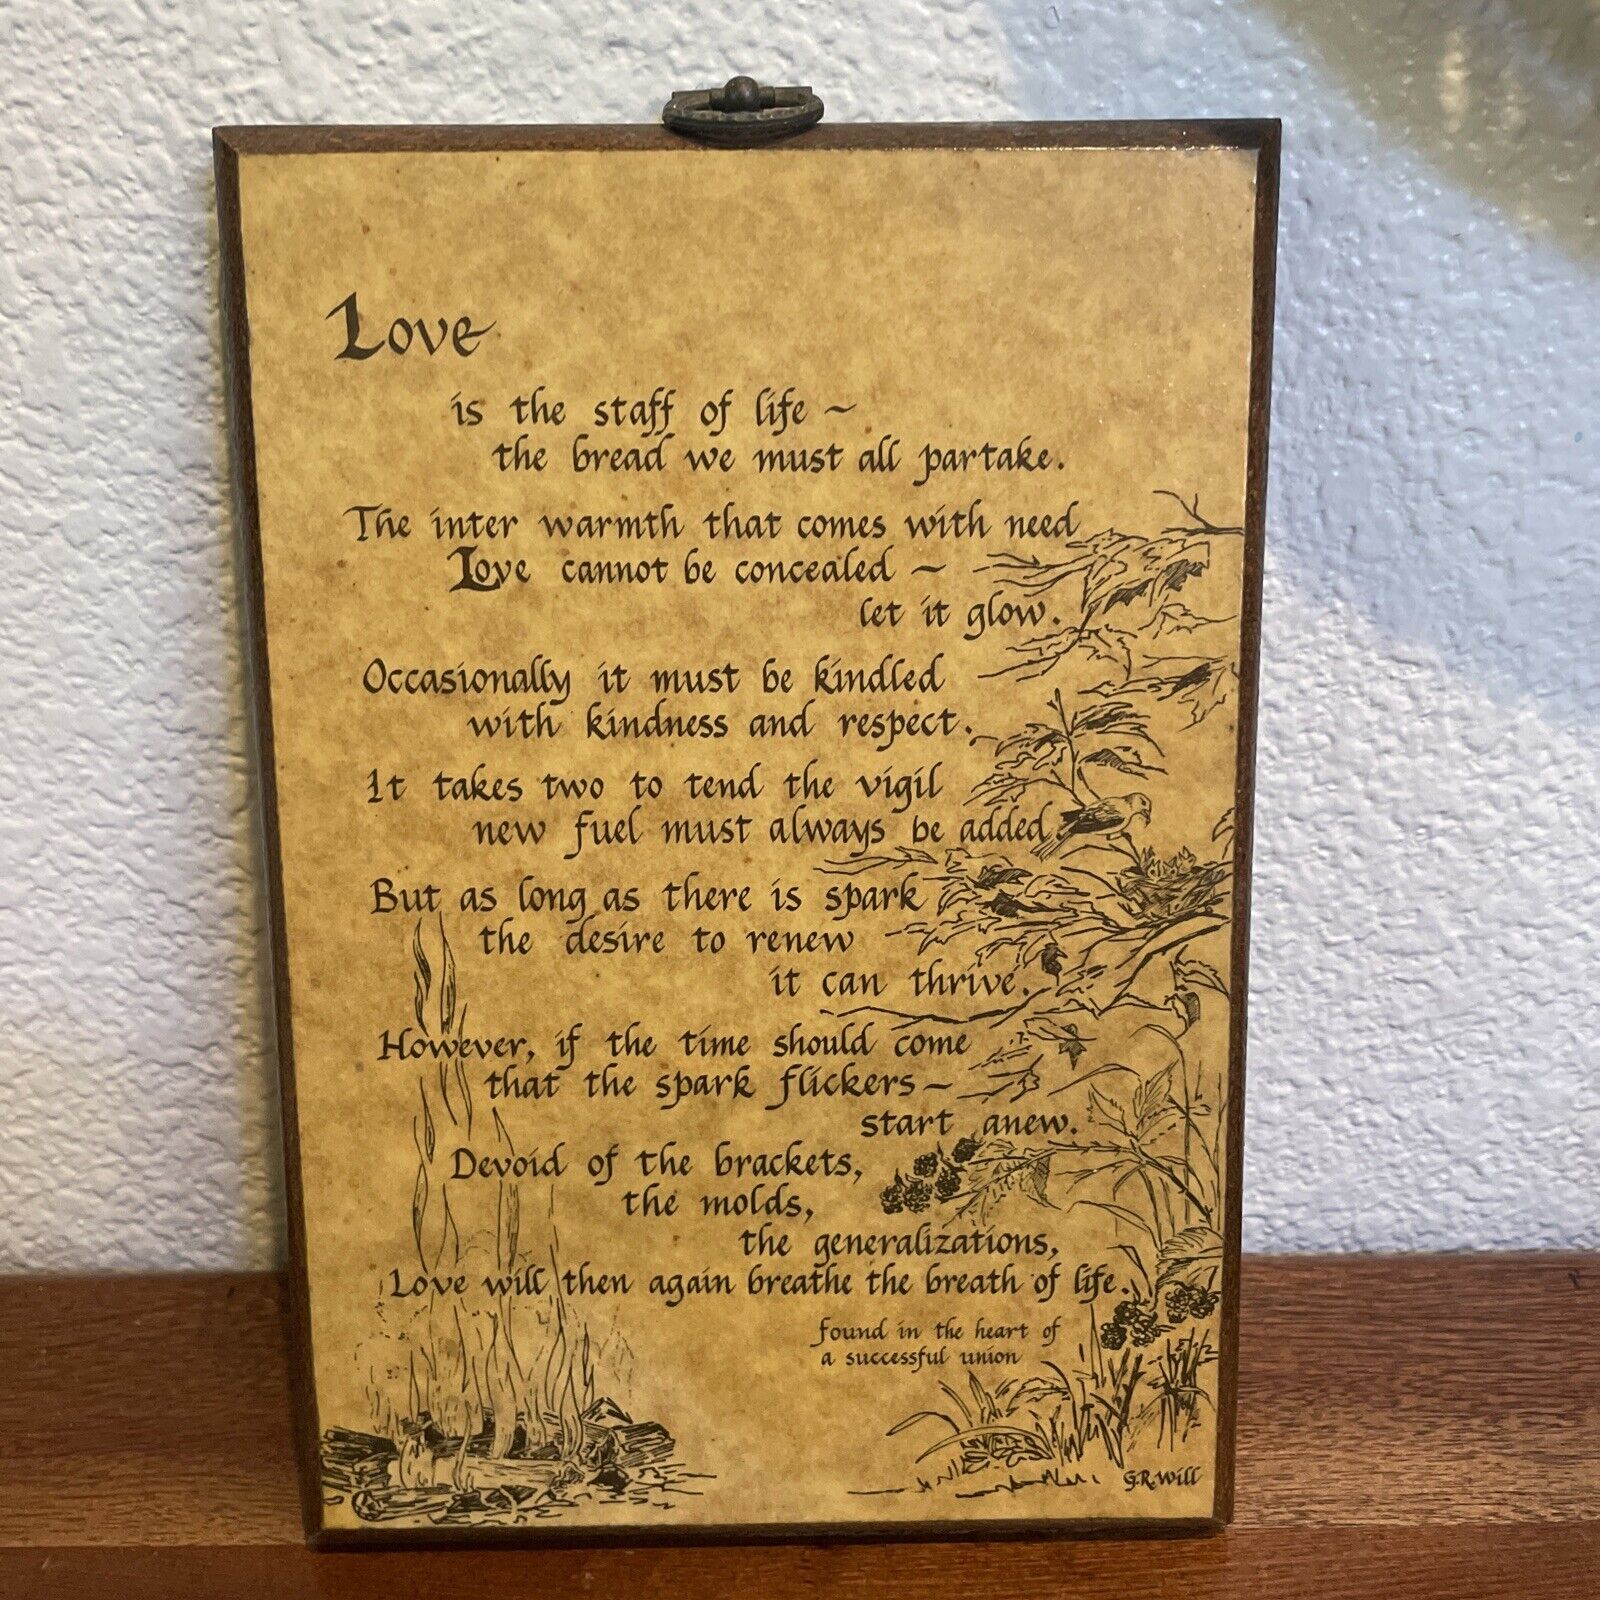 Vintage 1975 Love Poem Wooden Wall Art Plaque Calligraphy 8 X 6 G.R. Will Yellow